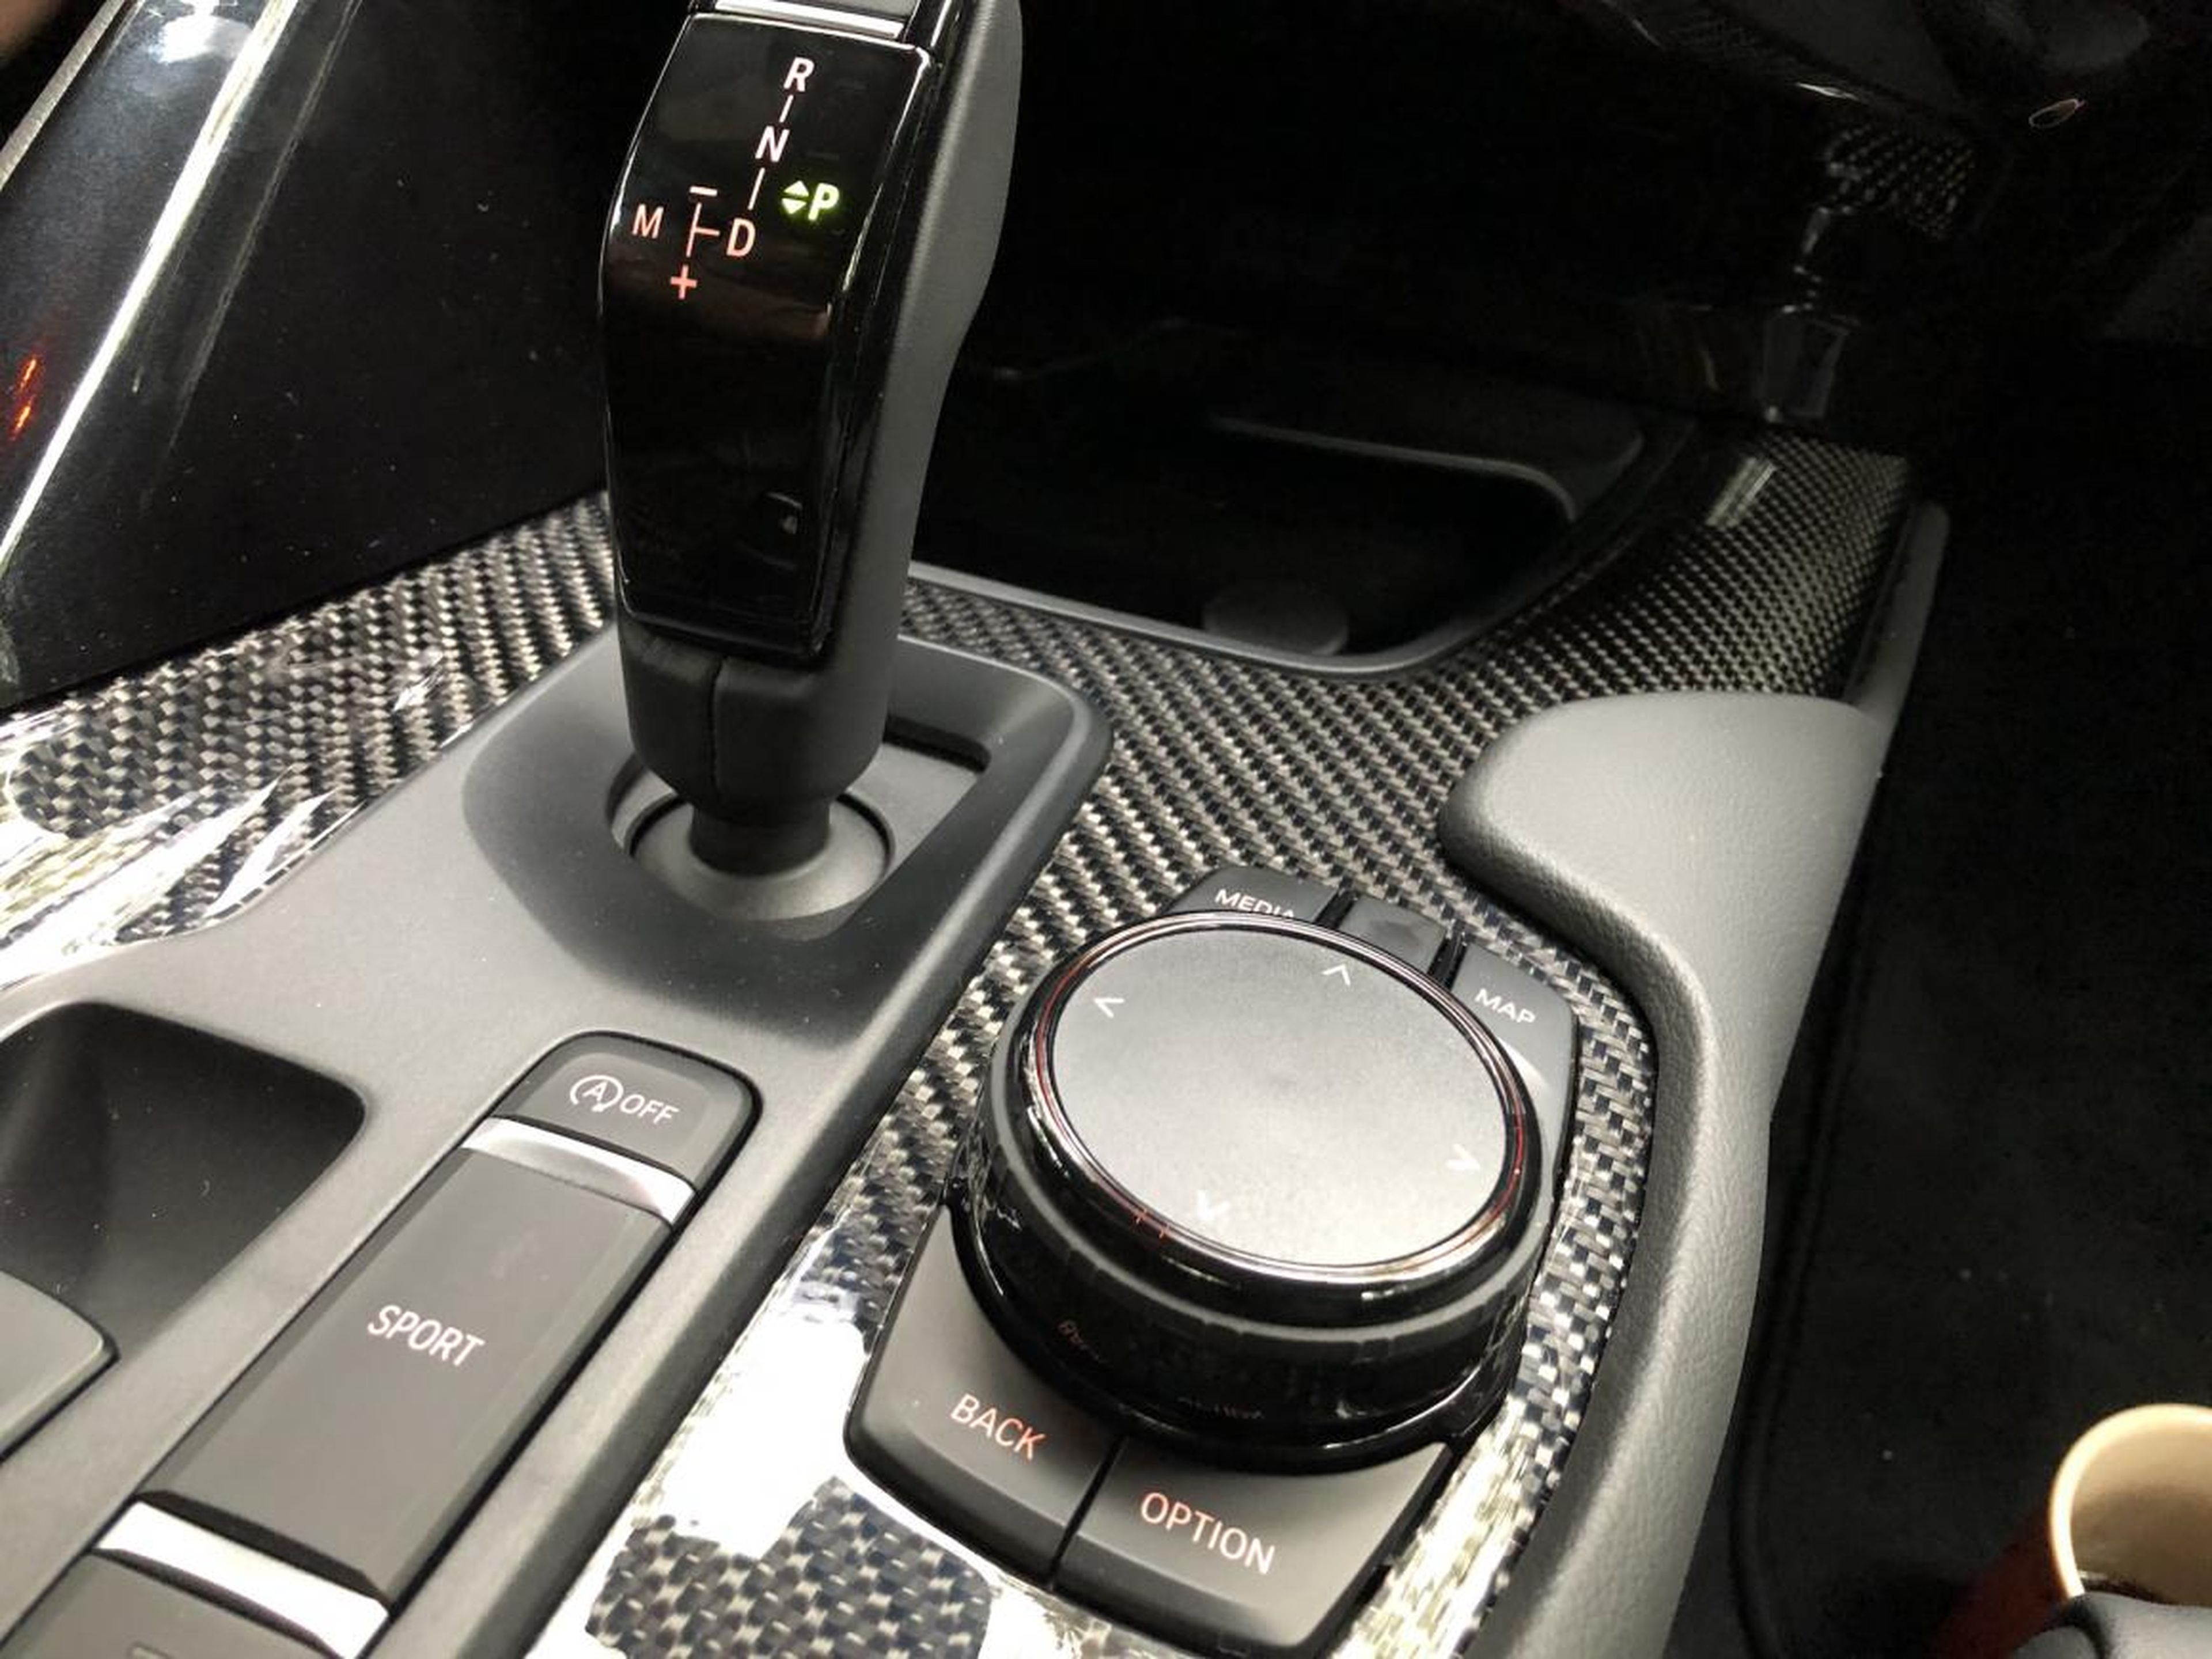 You don't have to use the touchscreen: the familiar iDrive puck-and-buttons controller resides exactly where any BMW owner would expect to find it.